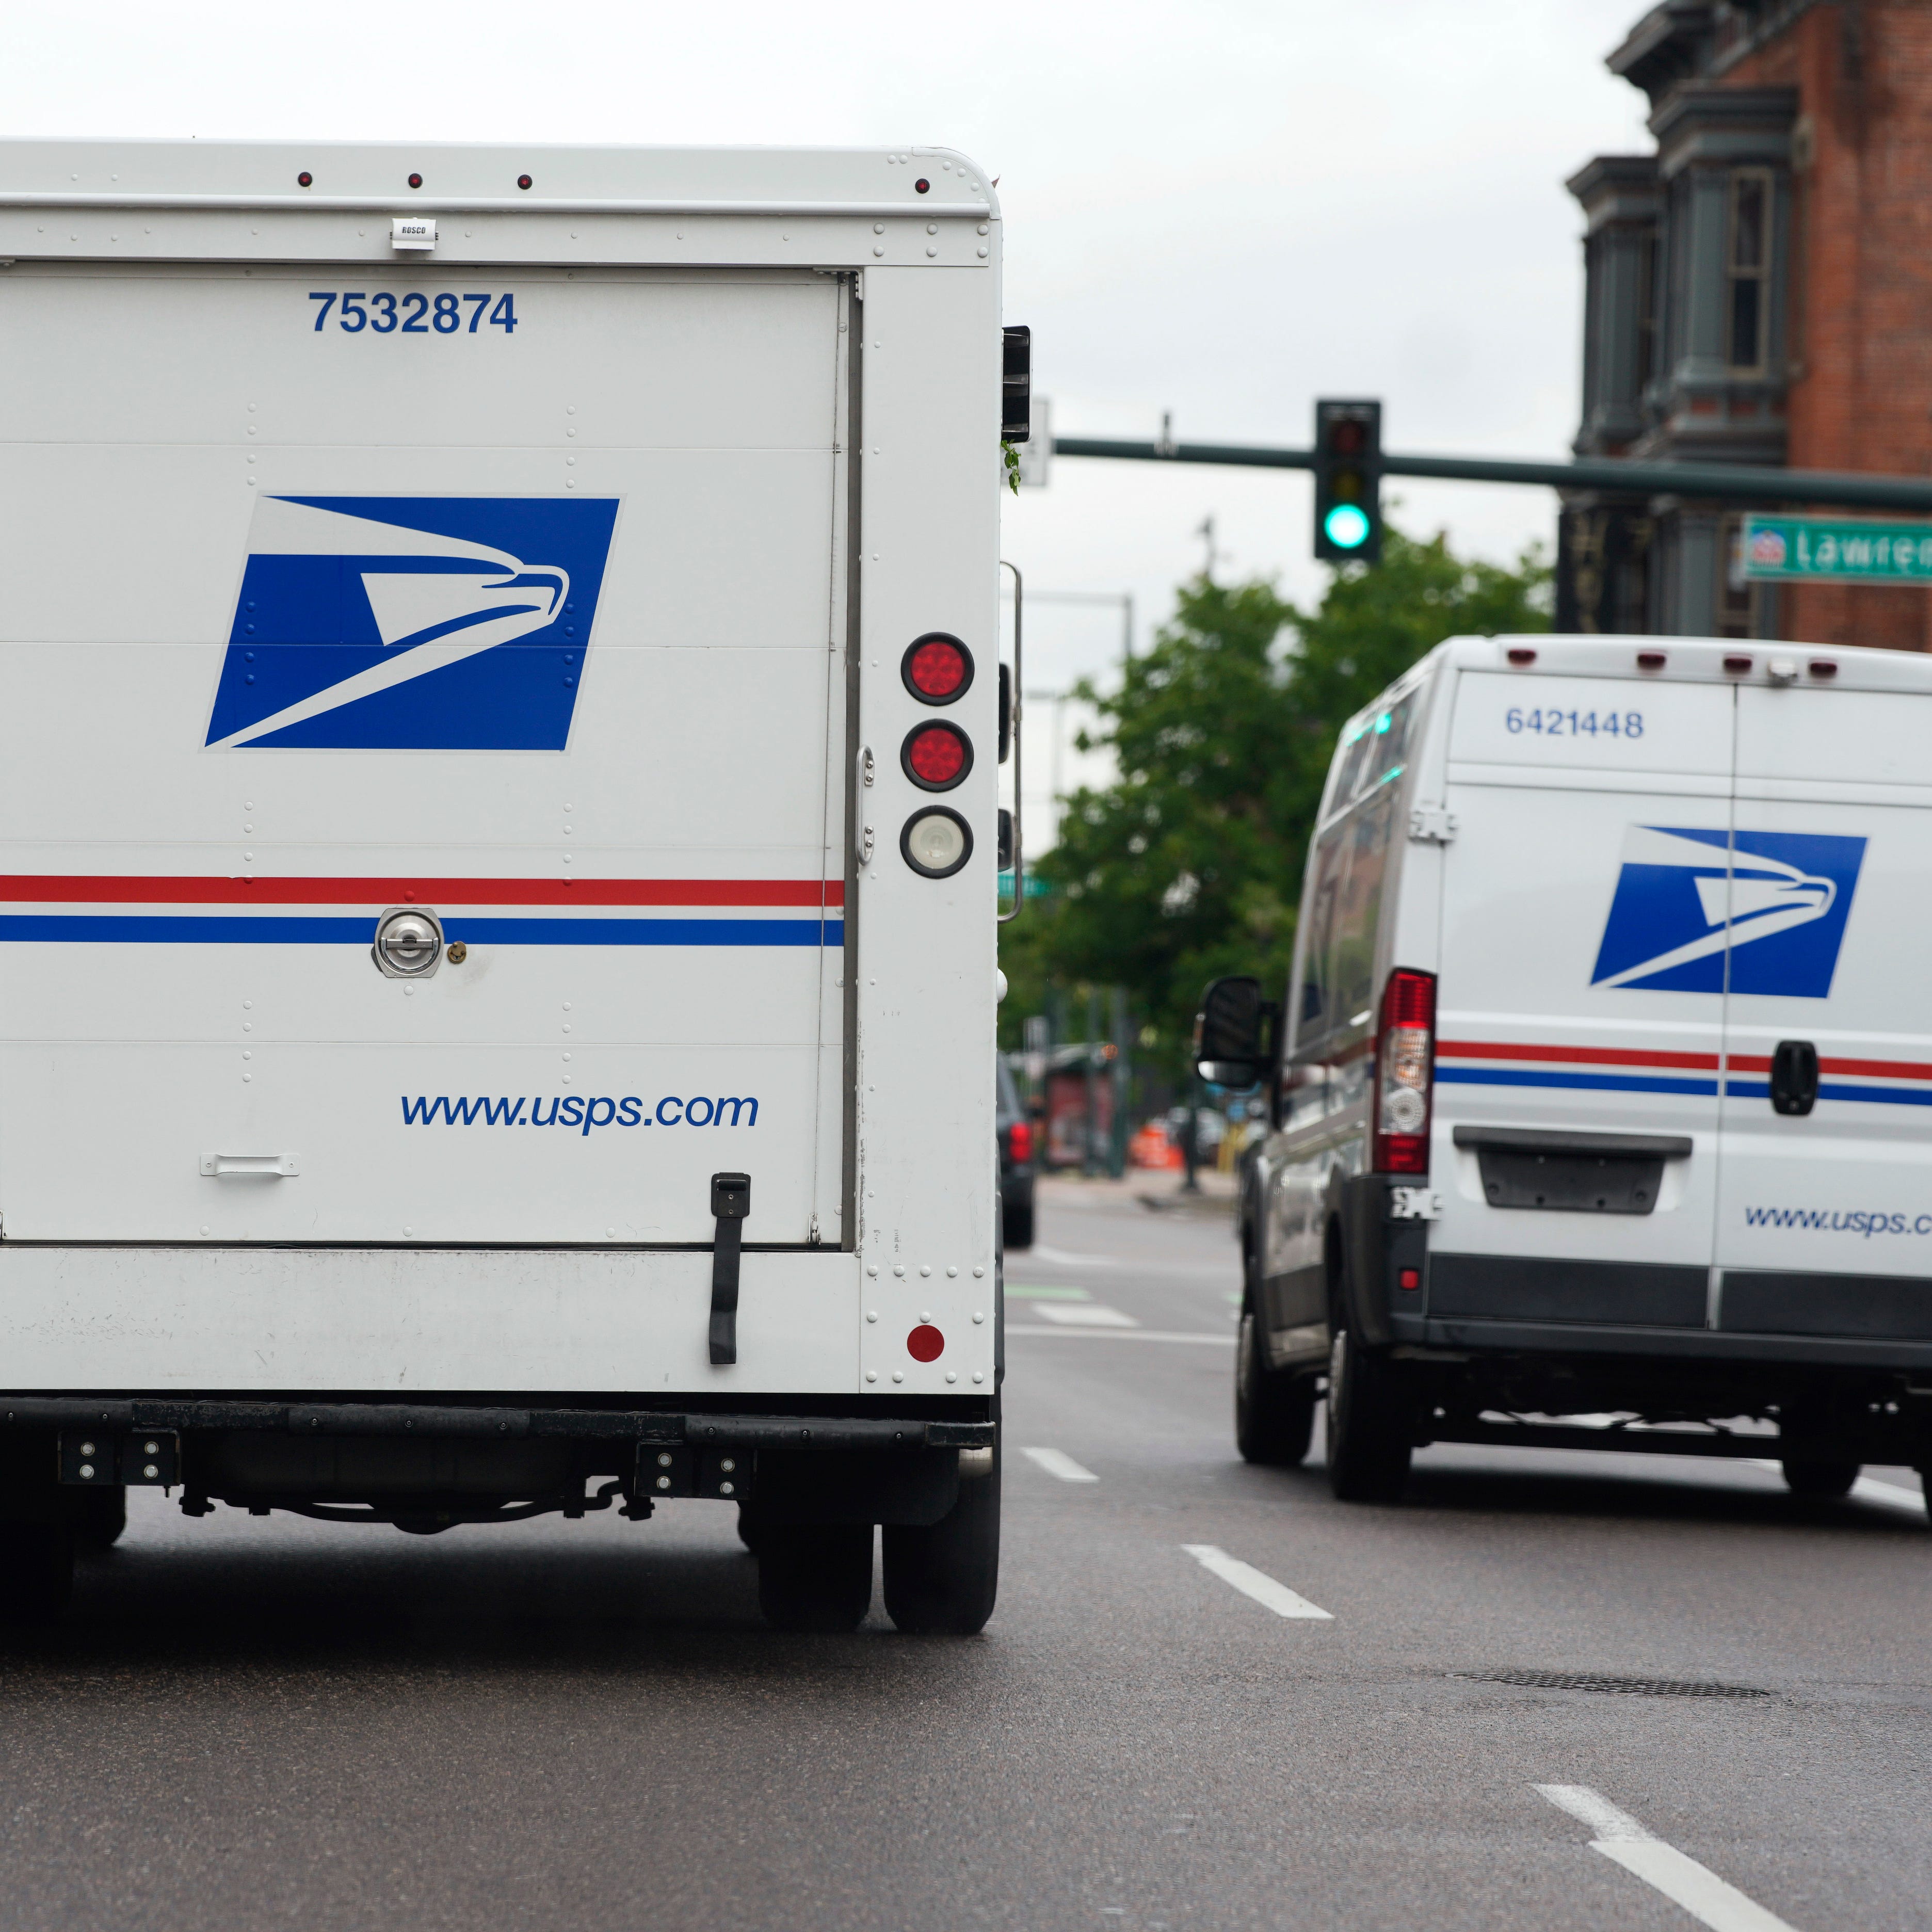 A USPS logo adorns the back doors of United States Postal Service delivery vehicles as they proceed westbound along 20th Street from Stout Street and the main post office in downtown Denver, Wednesday, June 1, 2022. USPS is creating a division to handle election mail issues as part of an effort to ensure swift and secure delivery of ballots for the 2022 midterm election, officials said Wednesday, July 27, 2022.